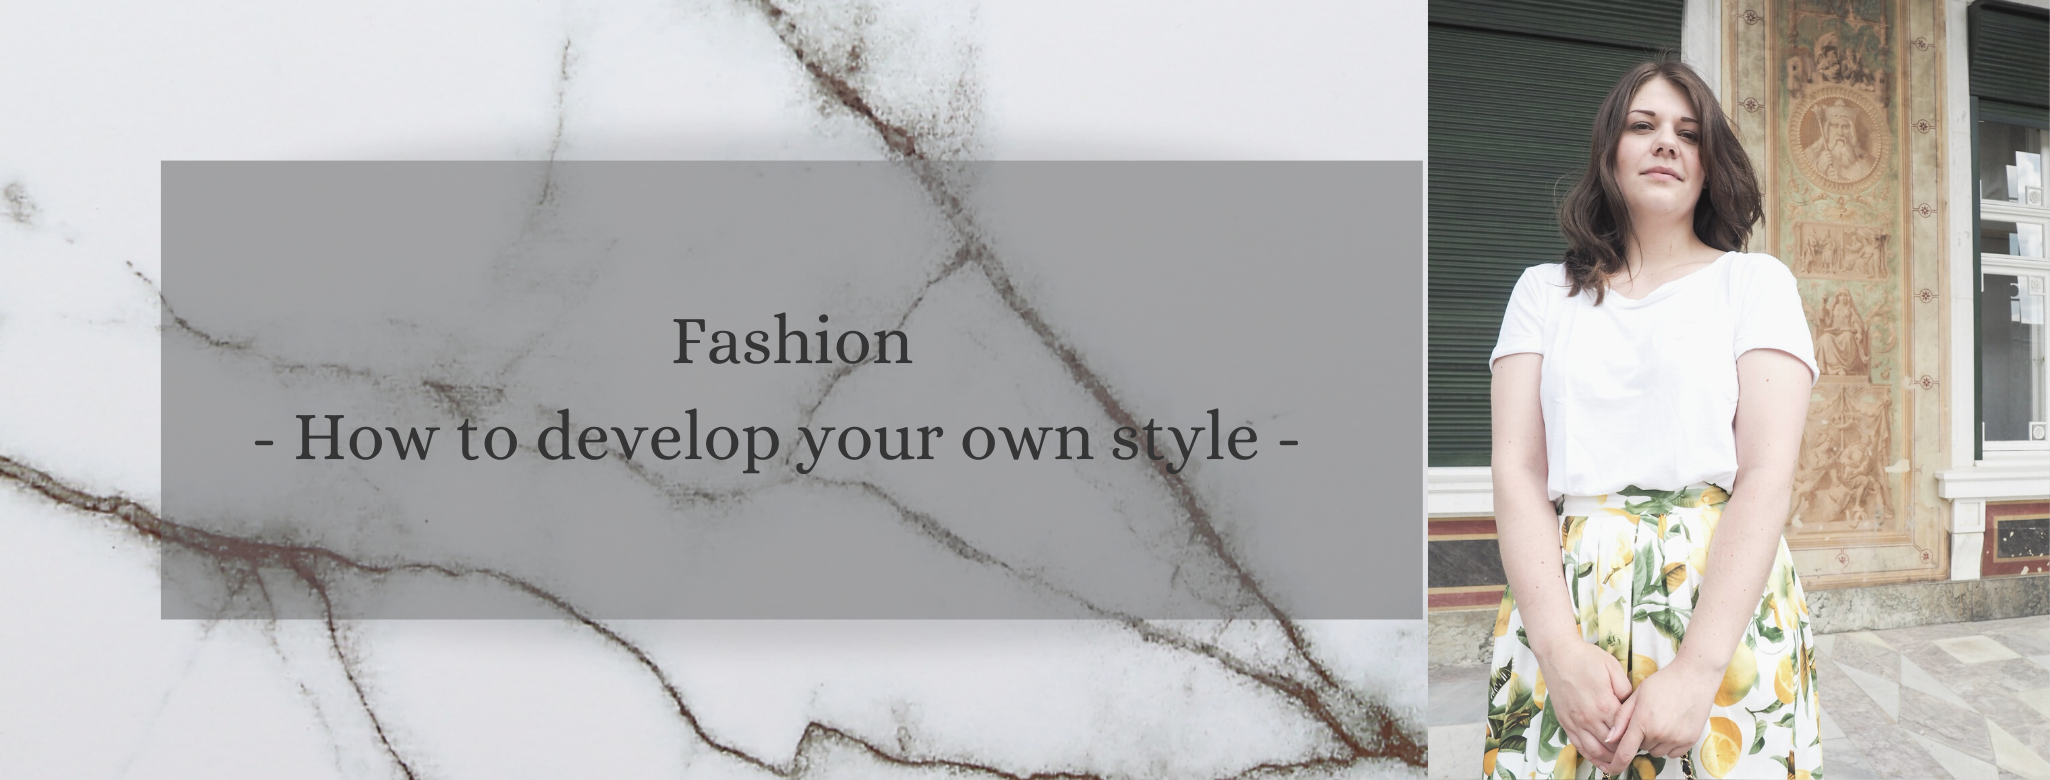 How to develop your own style